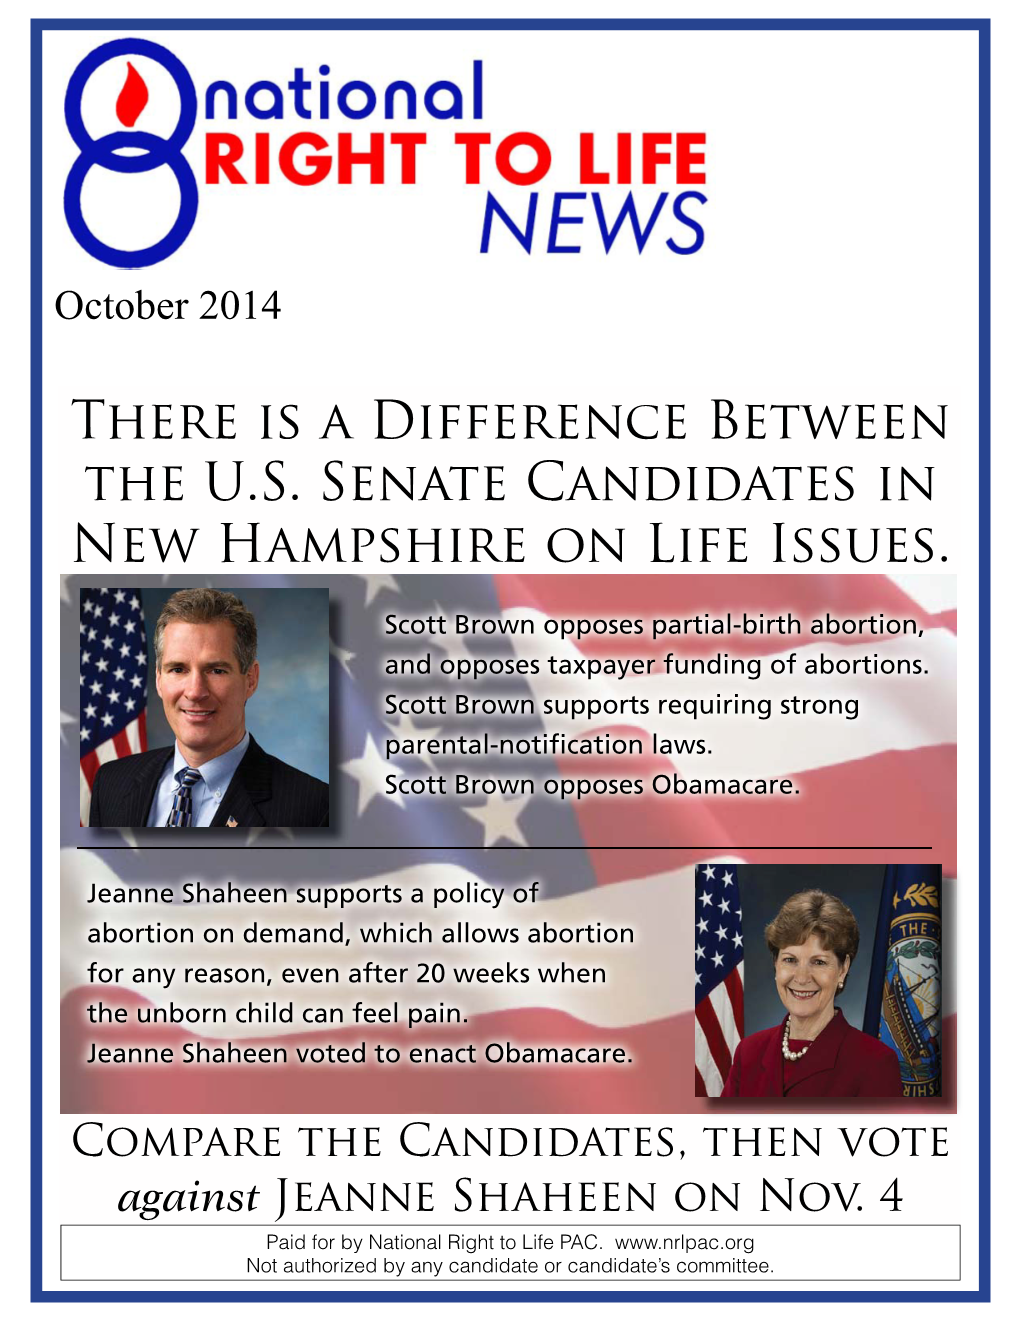 There Is a Difference Between the U.S. Senate Candidates in New Hampshire on Life Issues